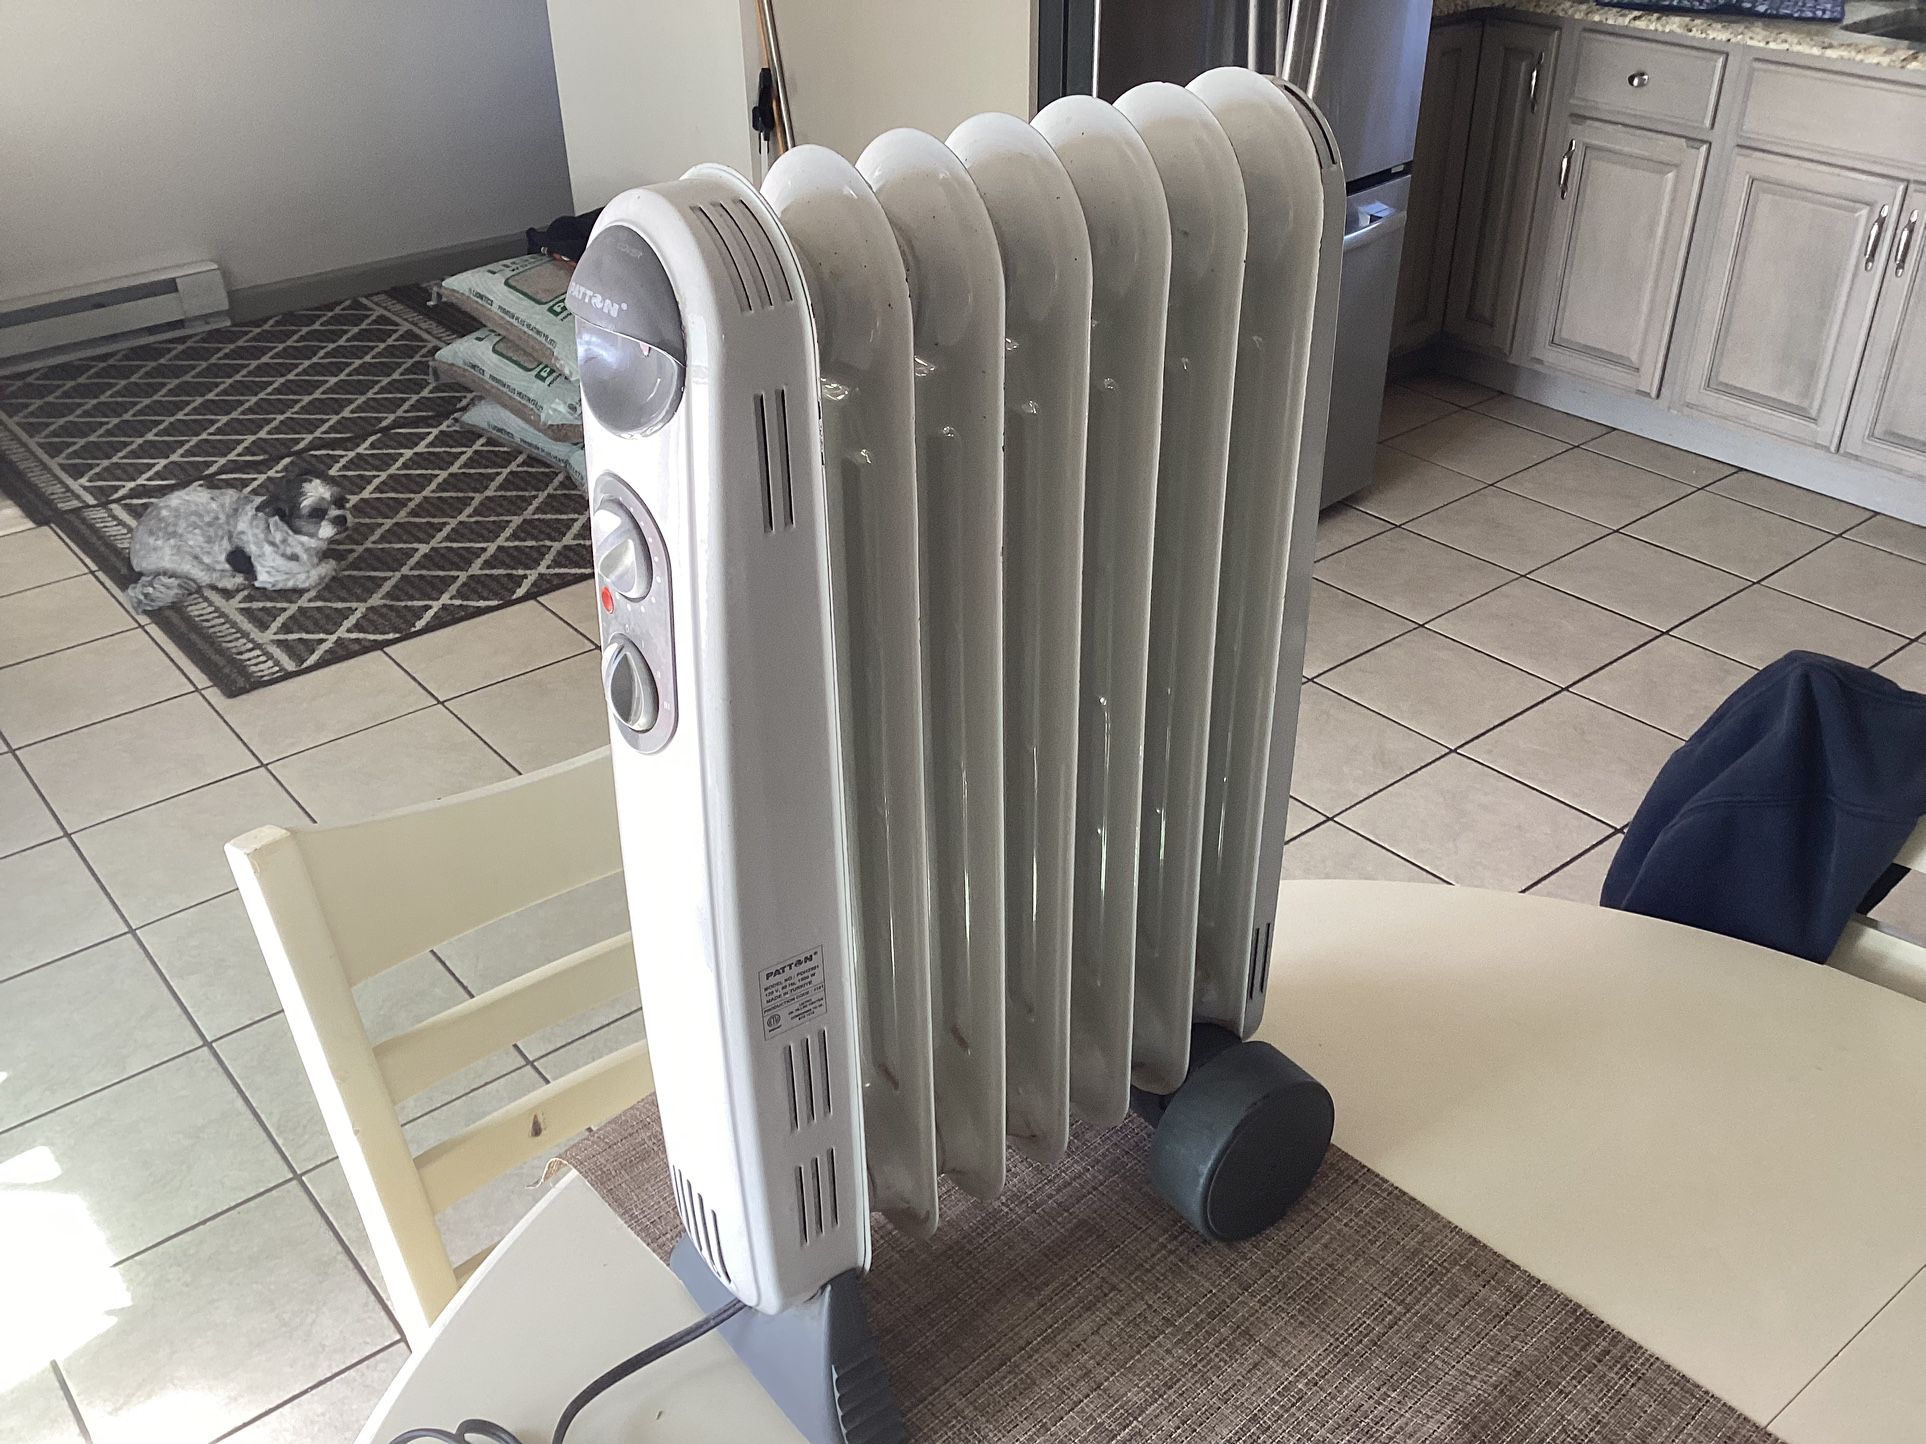 Portable Patton Electric Space Heater